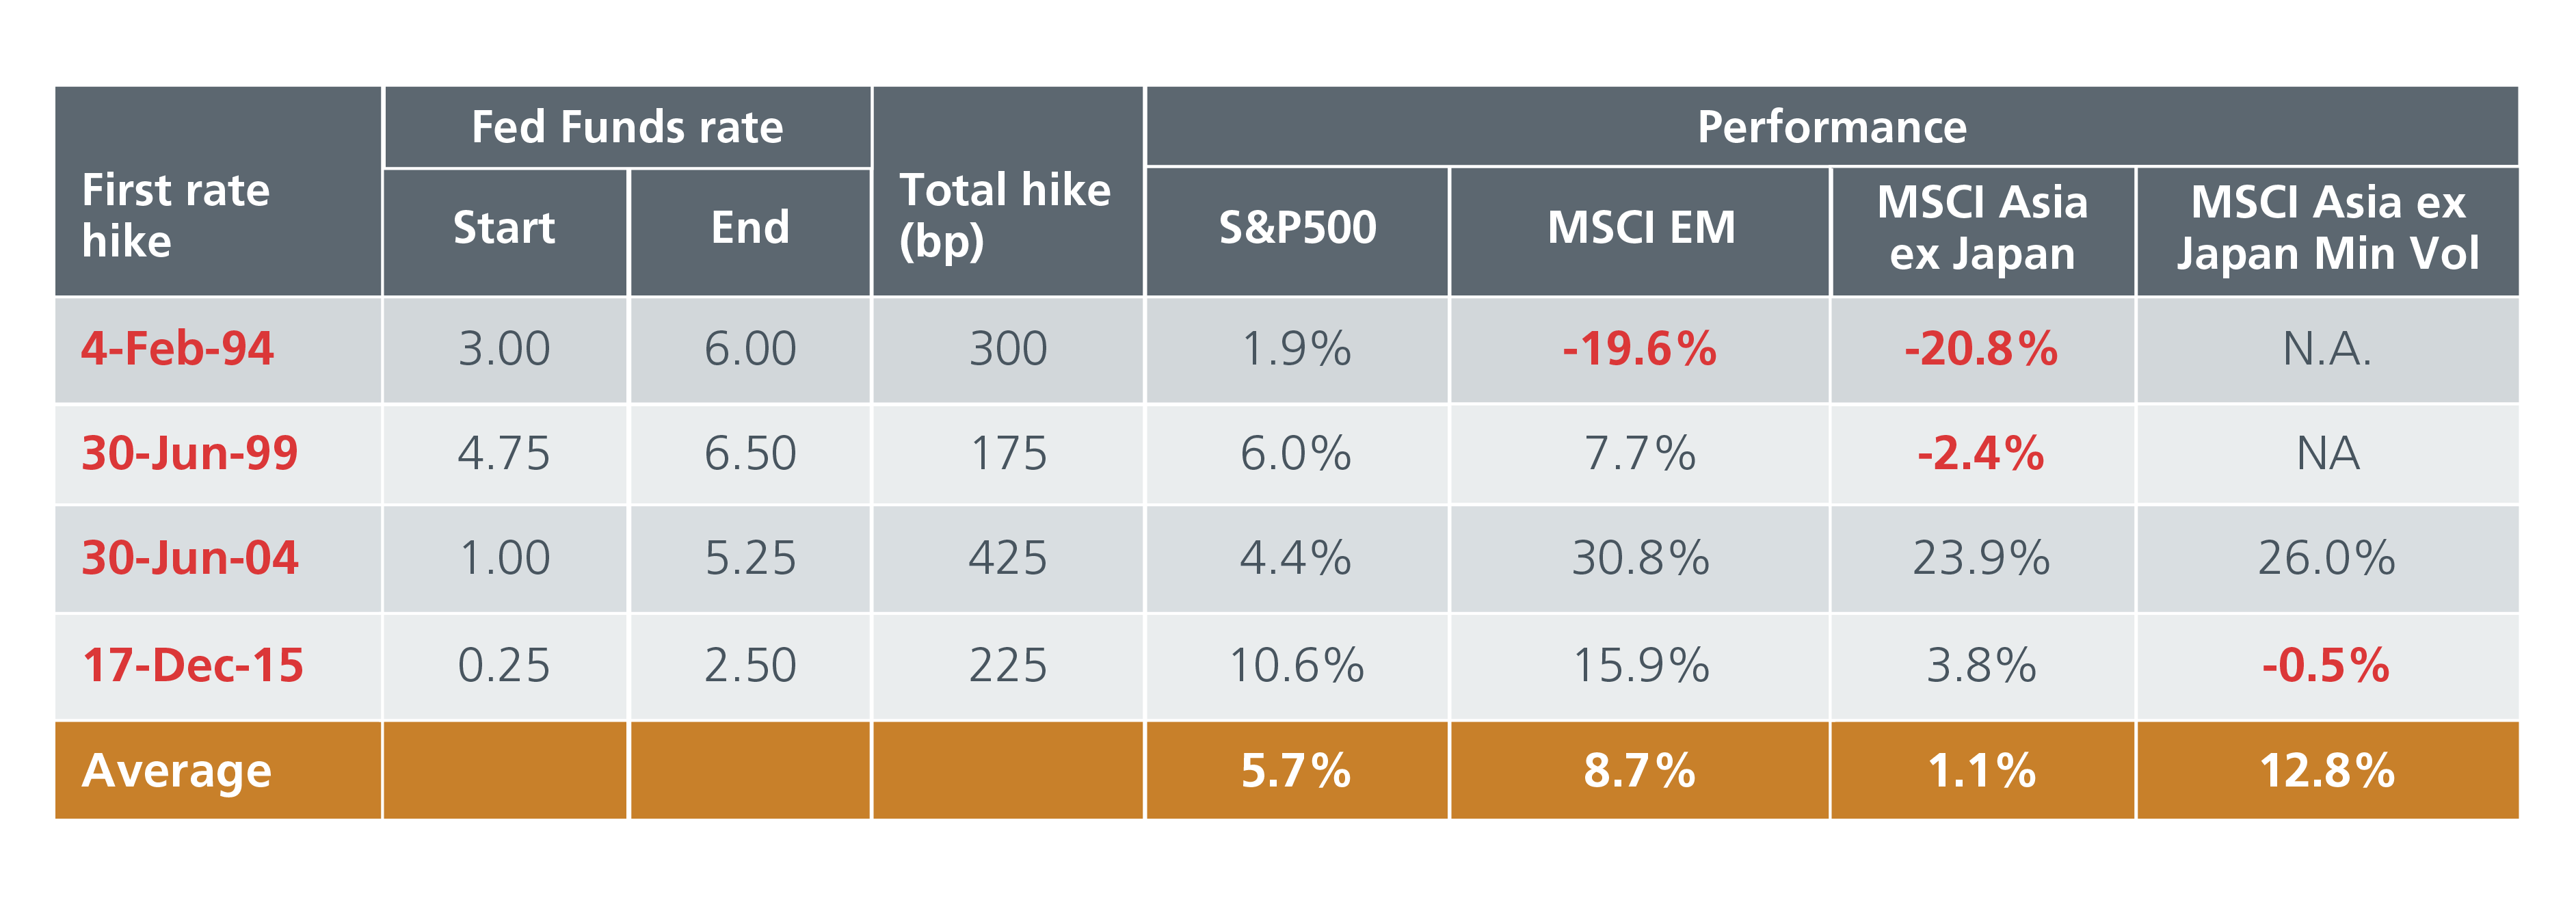 Tabular data of Market performance in recent extended rate hike cycles